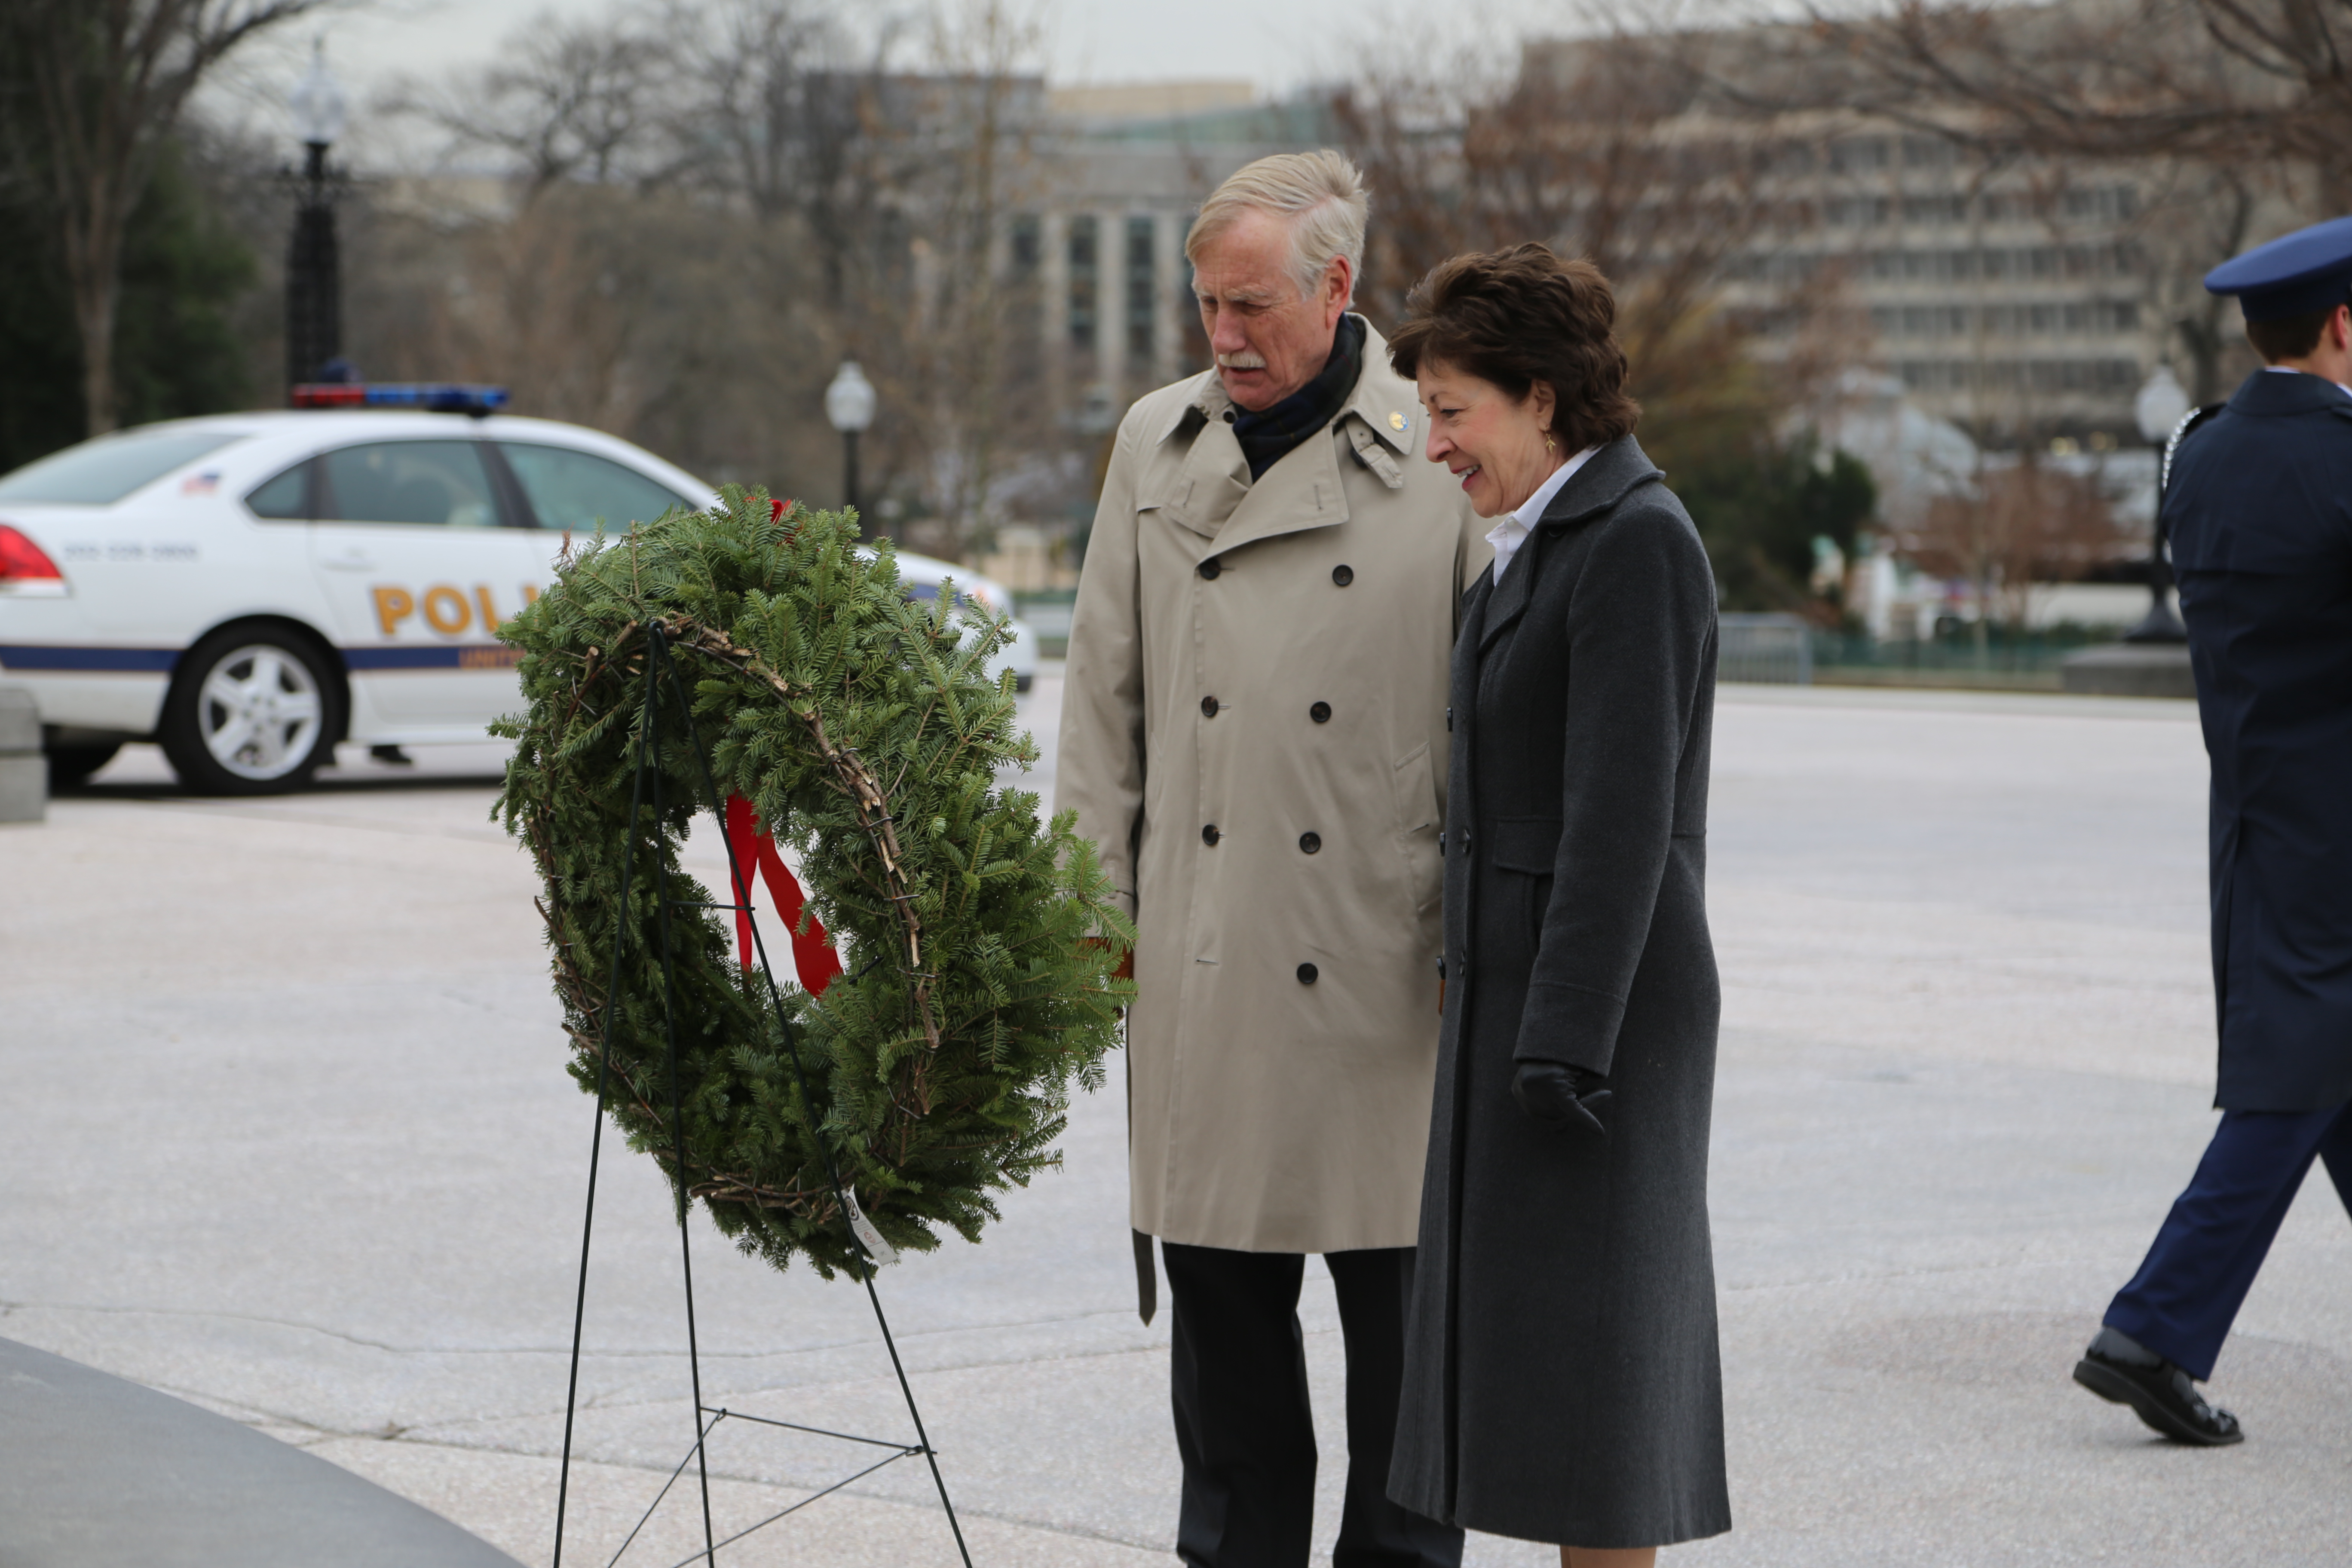 Collins, King Wreath Laying U.S. Capitol